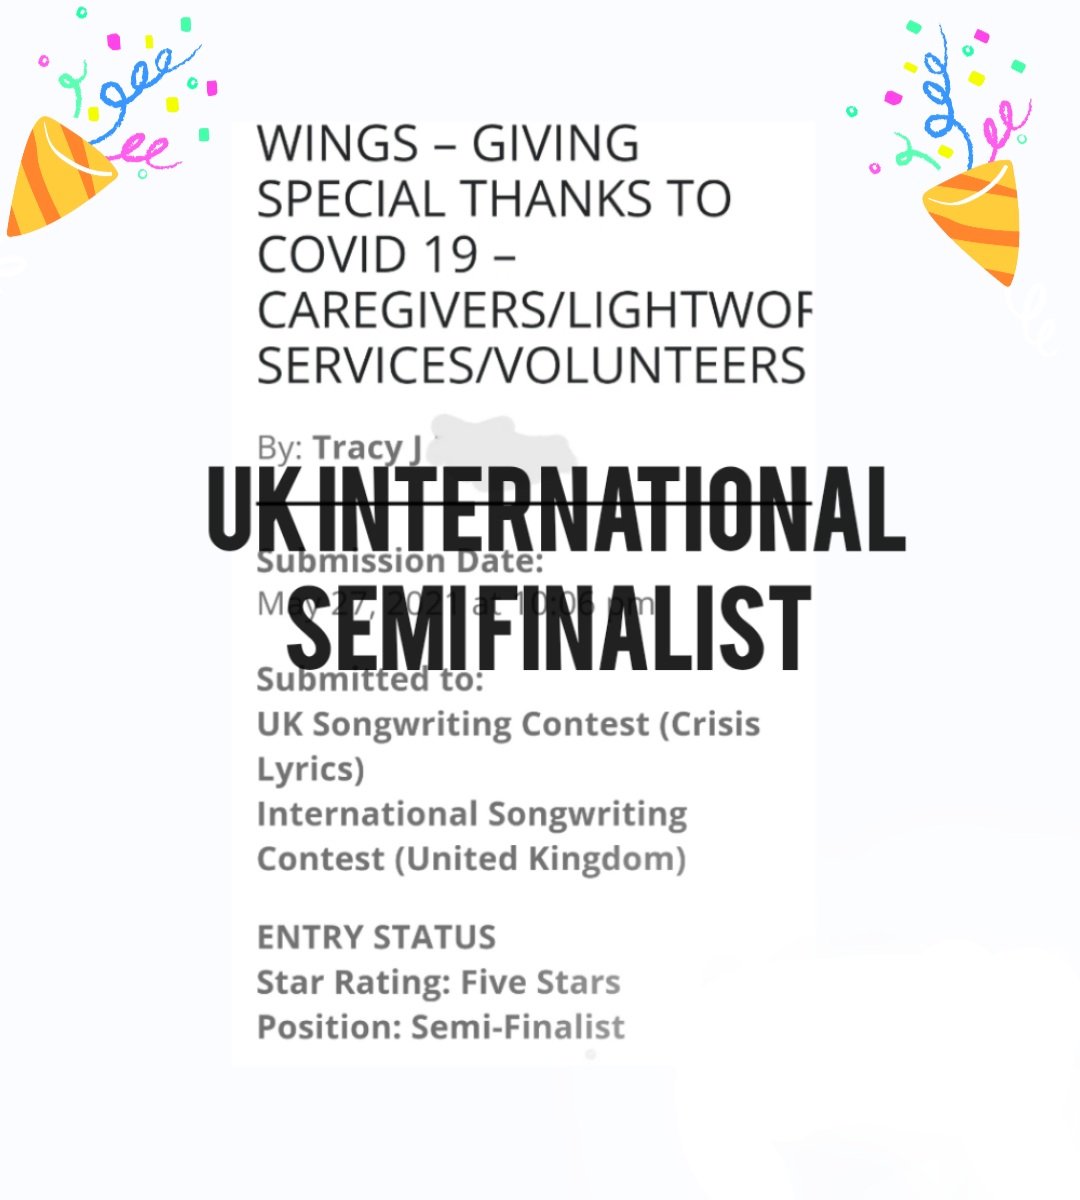 I am so happy to announce that I have reached the Semi Finals in the UK International Song writing contest in the Crisis Lyrics category with my song lyrics (Wings) my 4 other entries were given 5 stars and commended entry awards in - Singer songwriter, EDM, & love songs 🤗💃